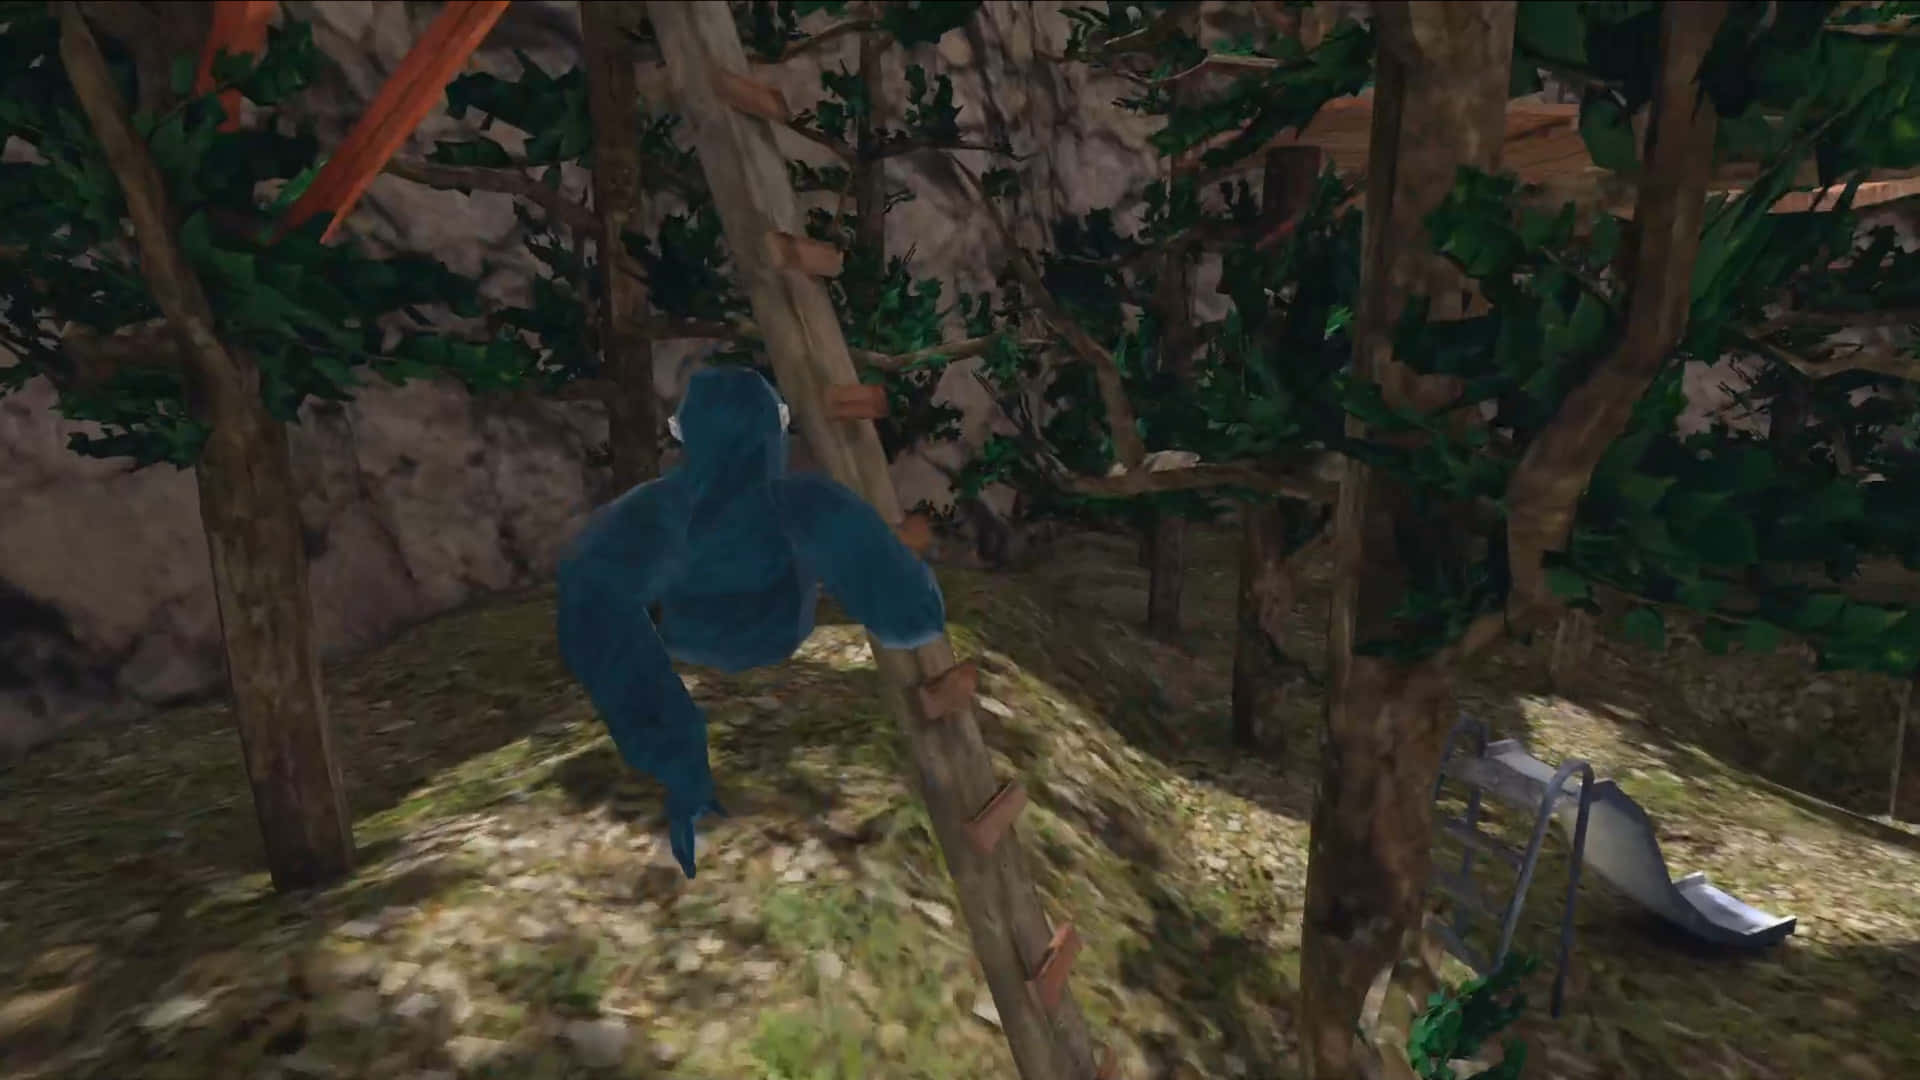 A Blue Monkey Is Climbing A Tree In A Video Game Background